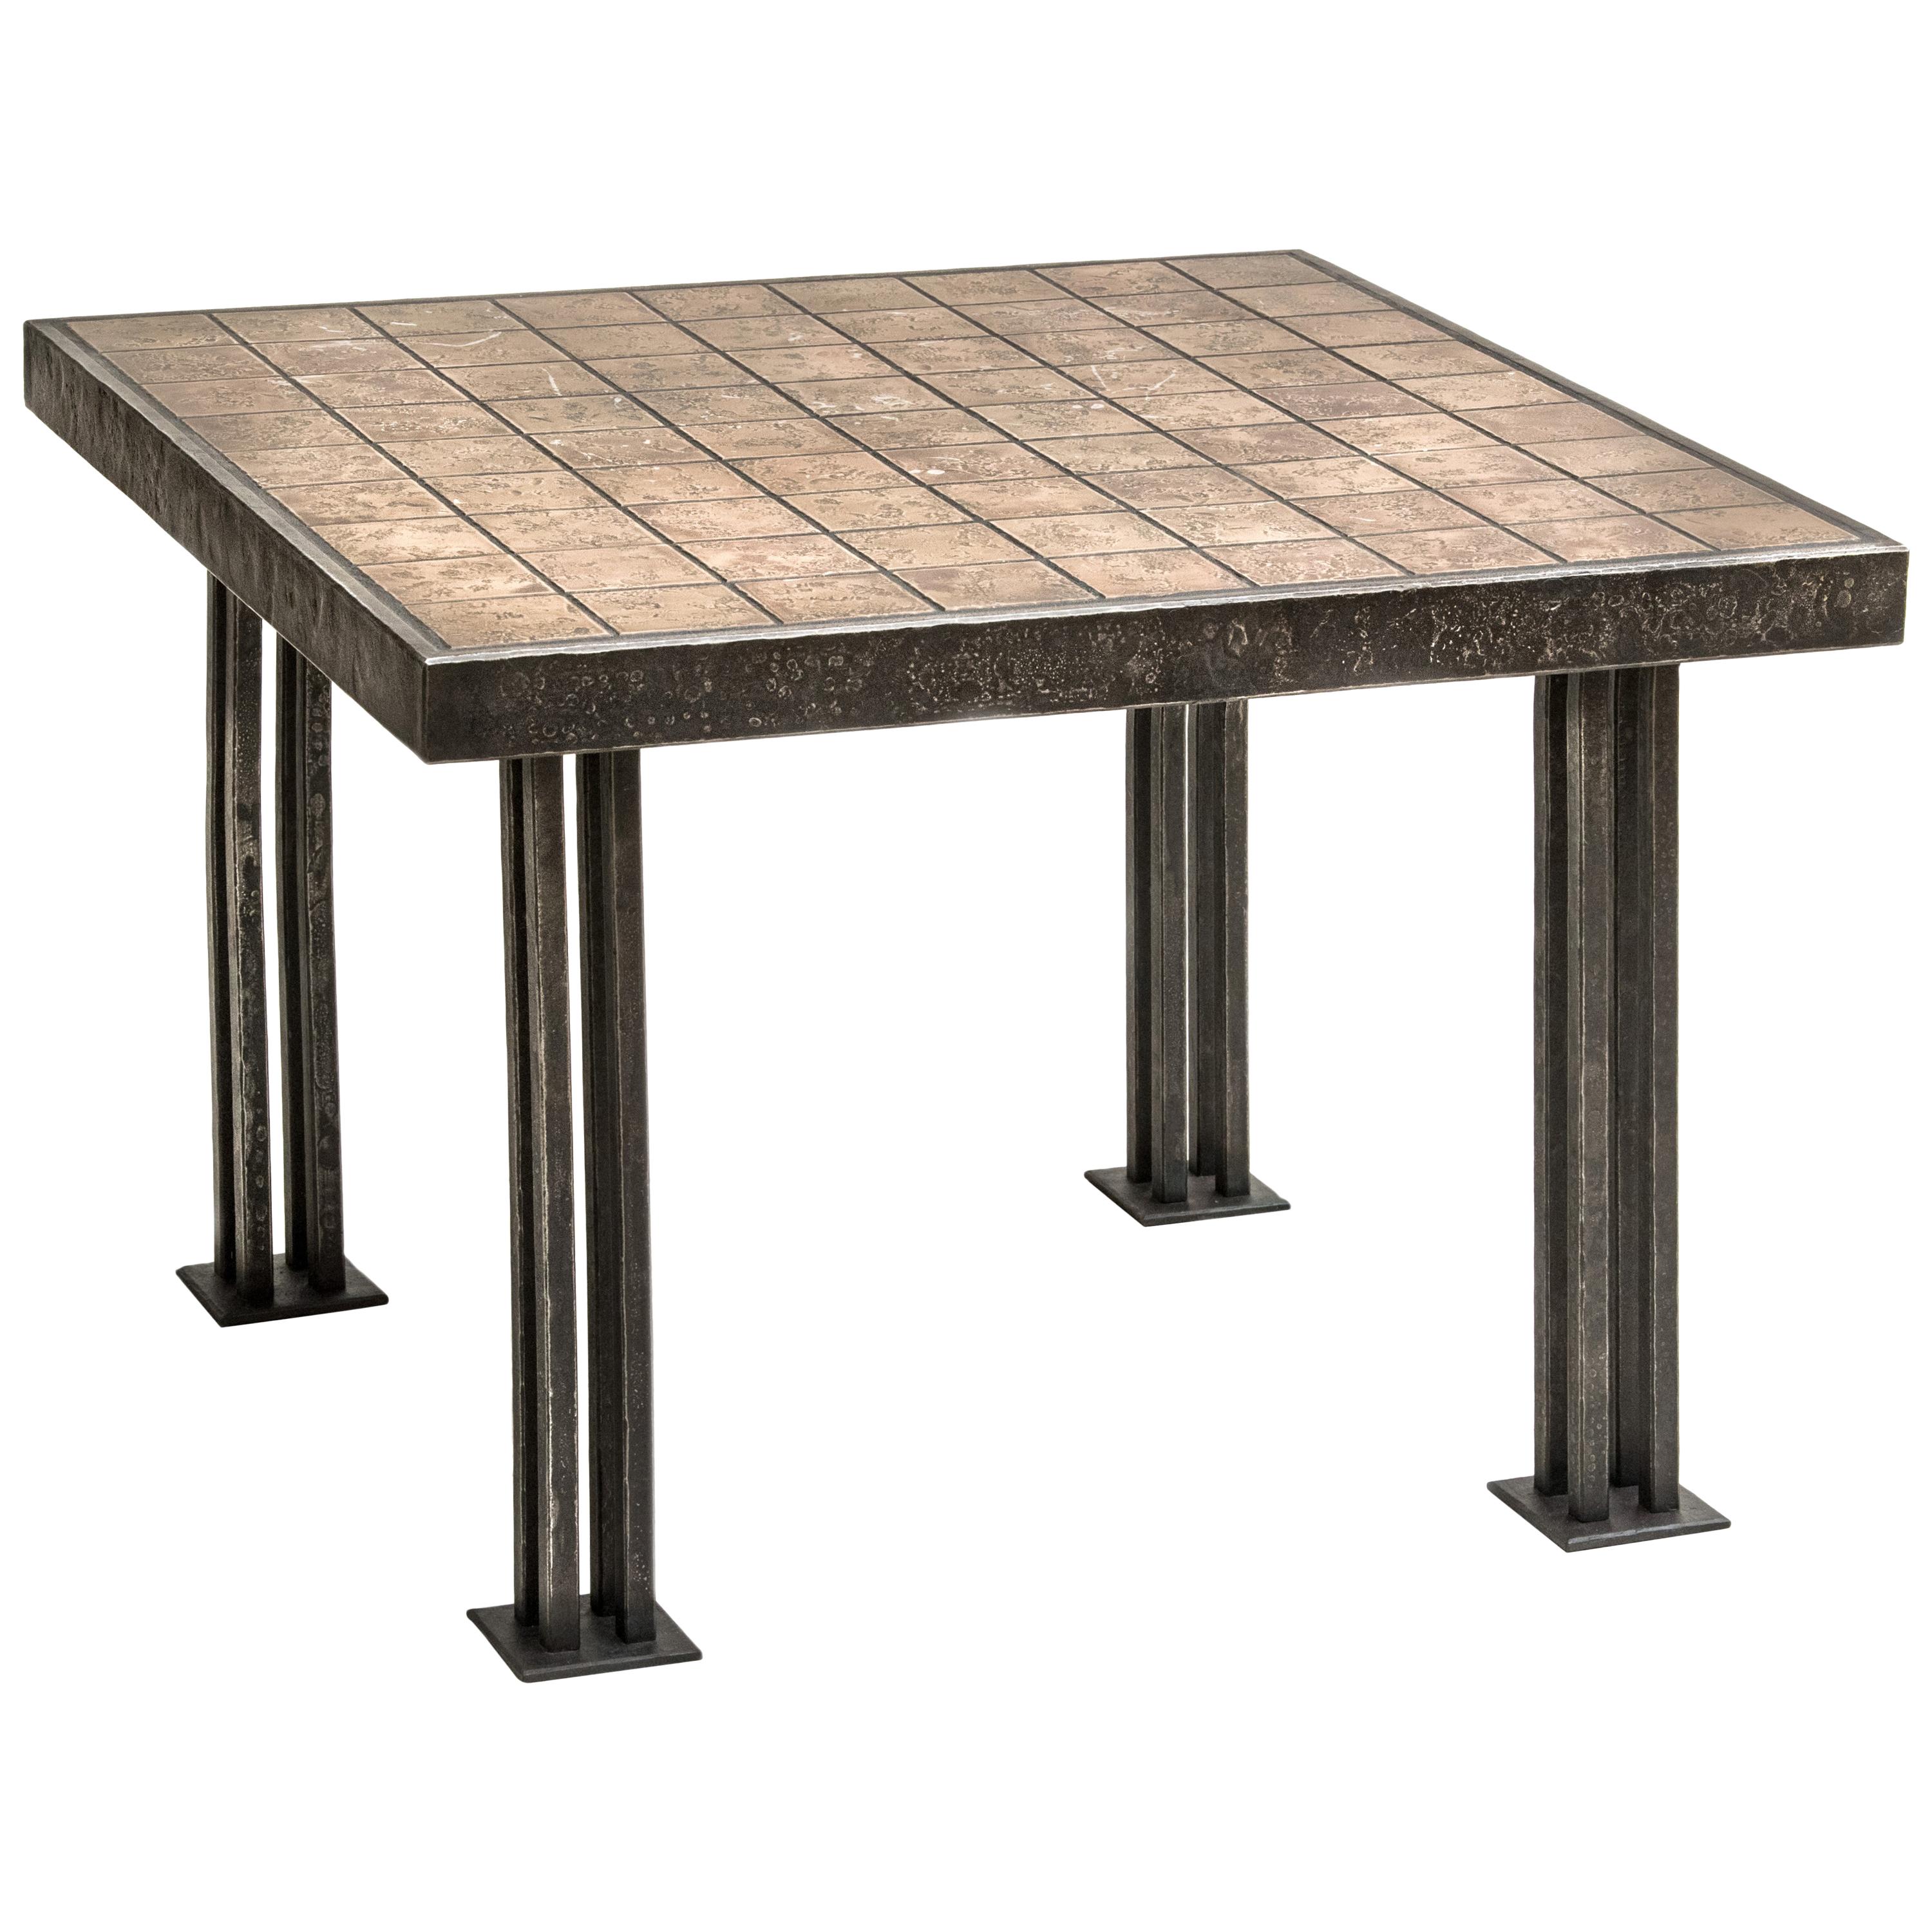 Square End Table Made of Forged Bronze Tiles and Forged Steel Legs